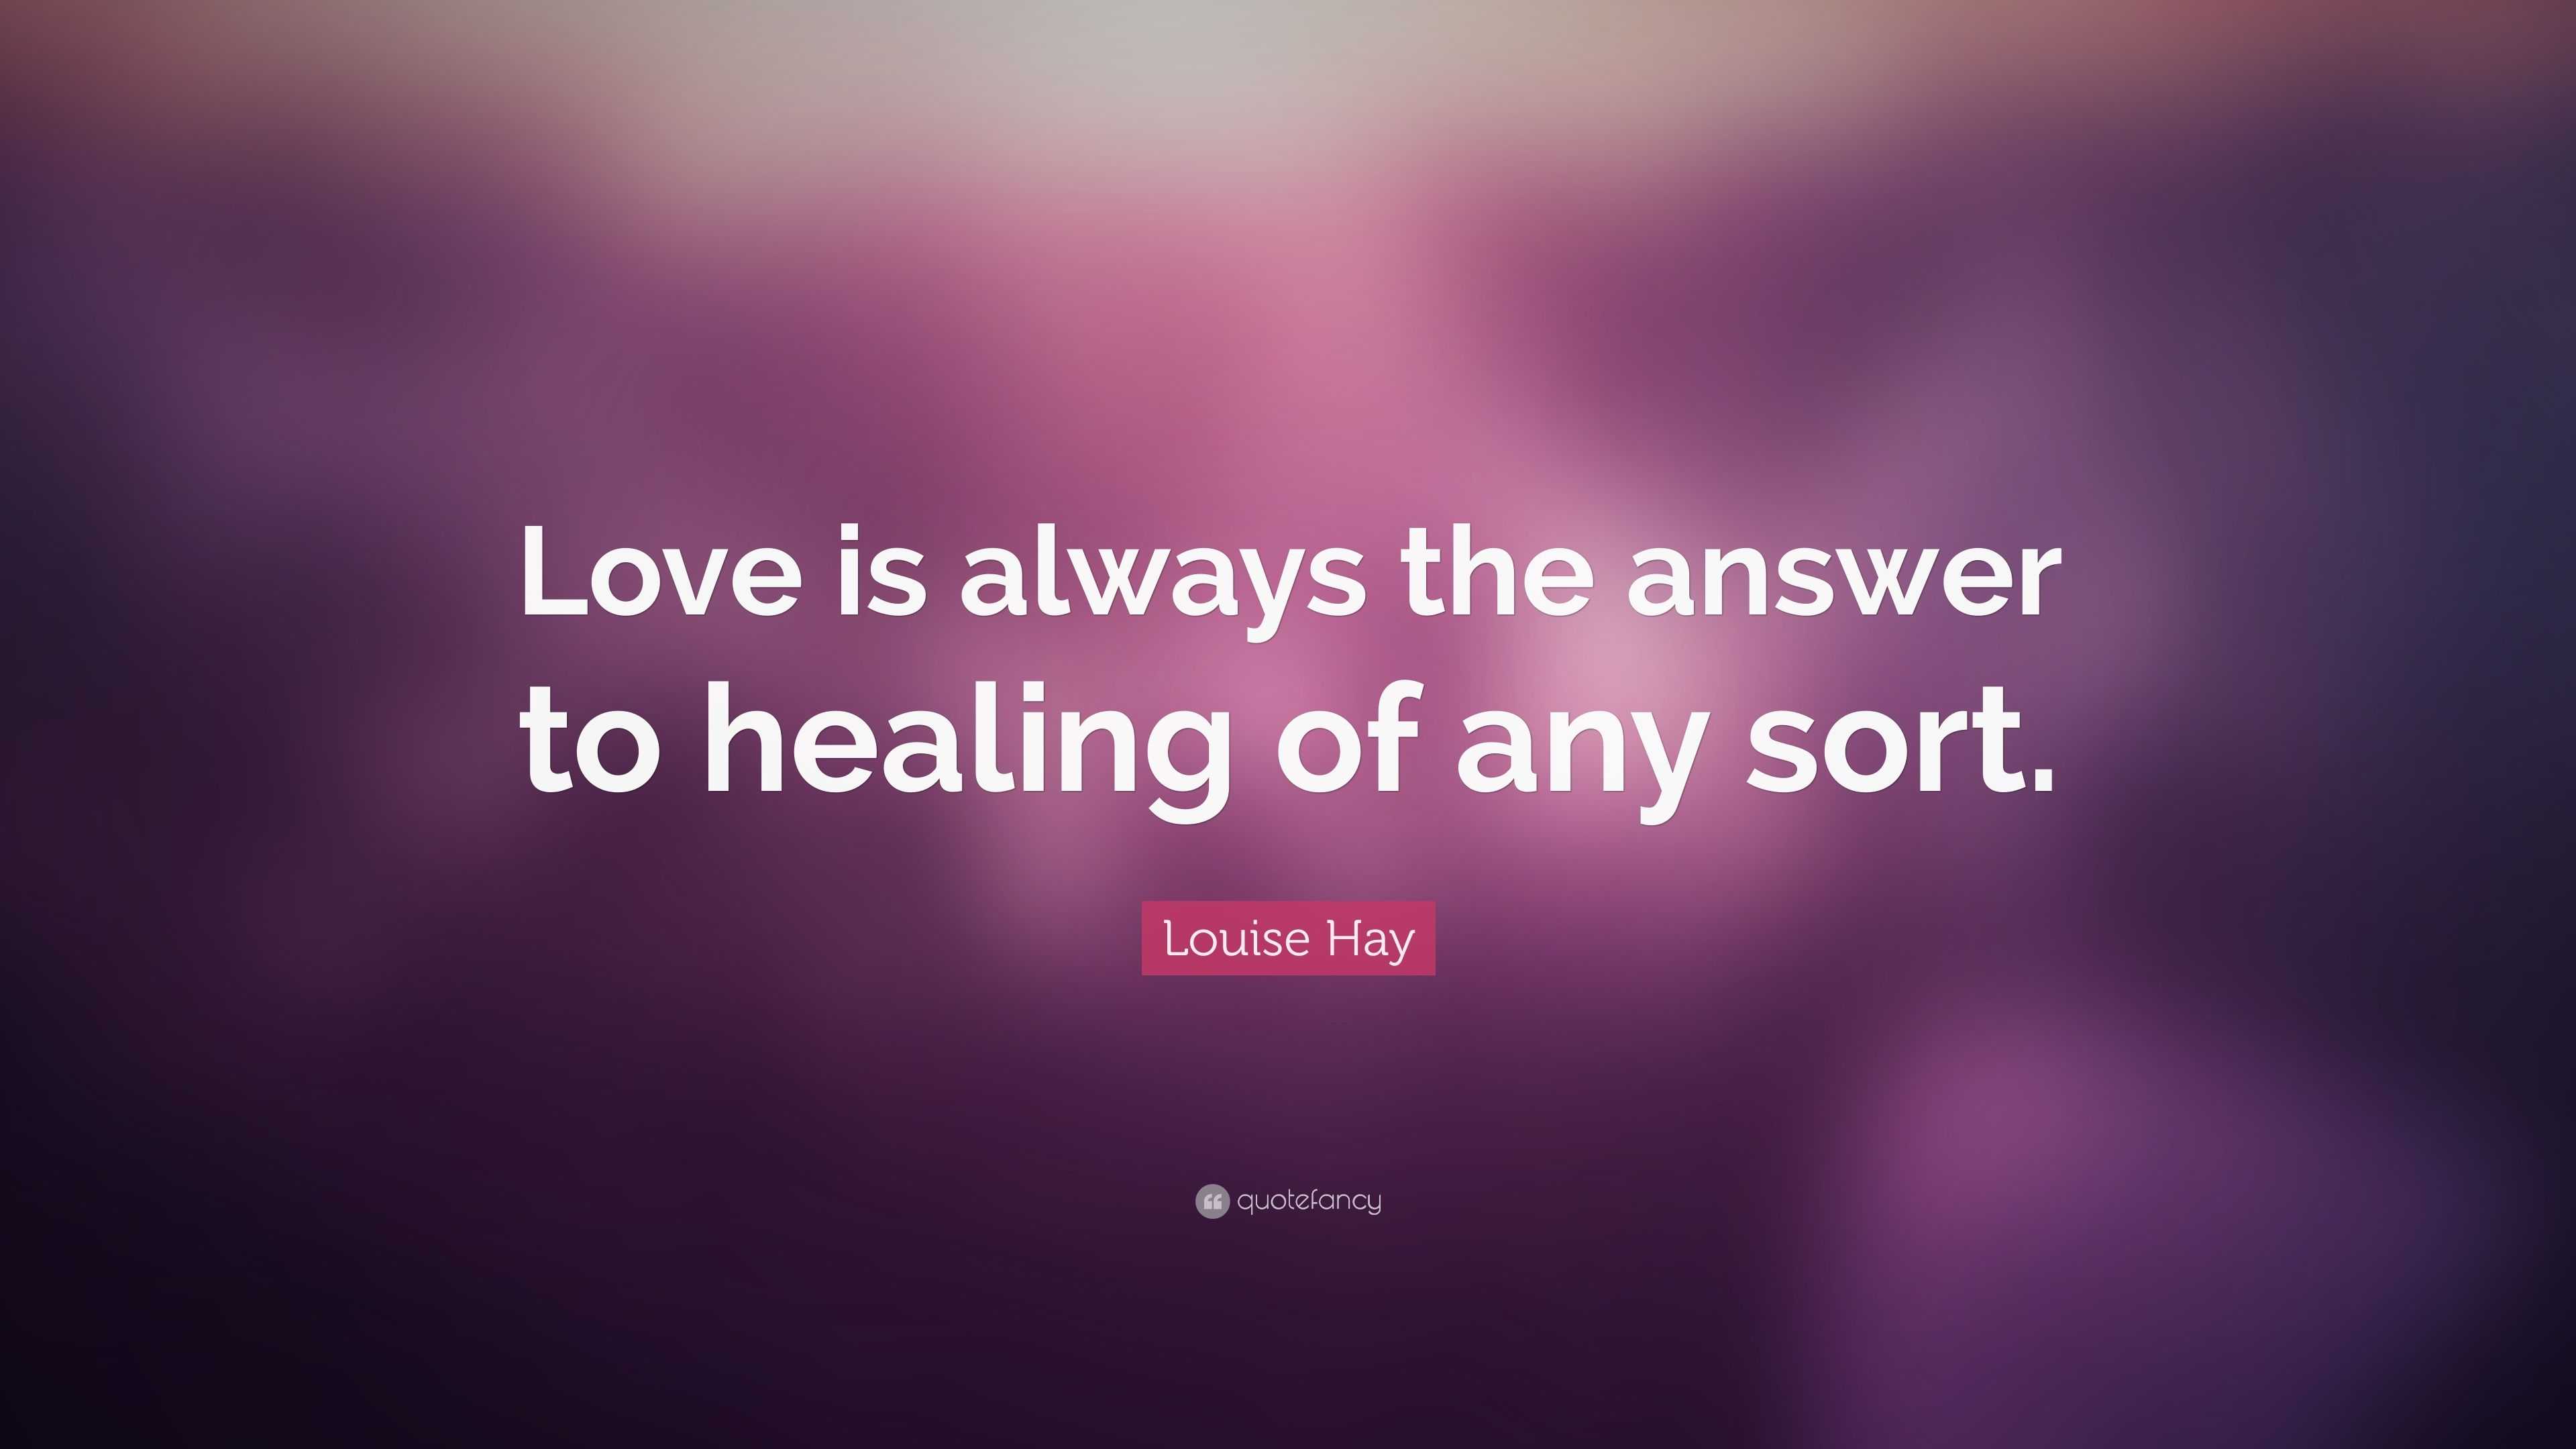 Louise Hay Quote: “Love is always the answer to healing of any sort.”